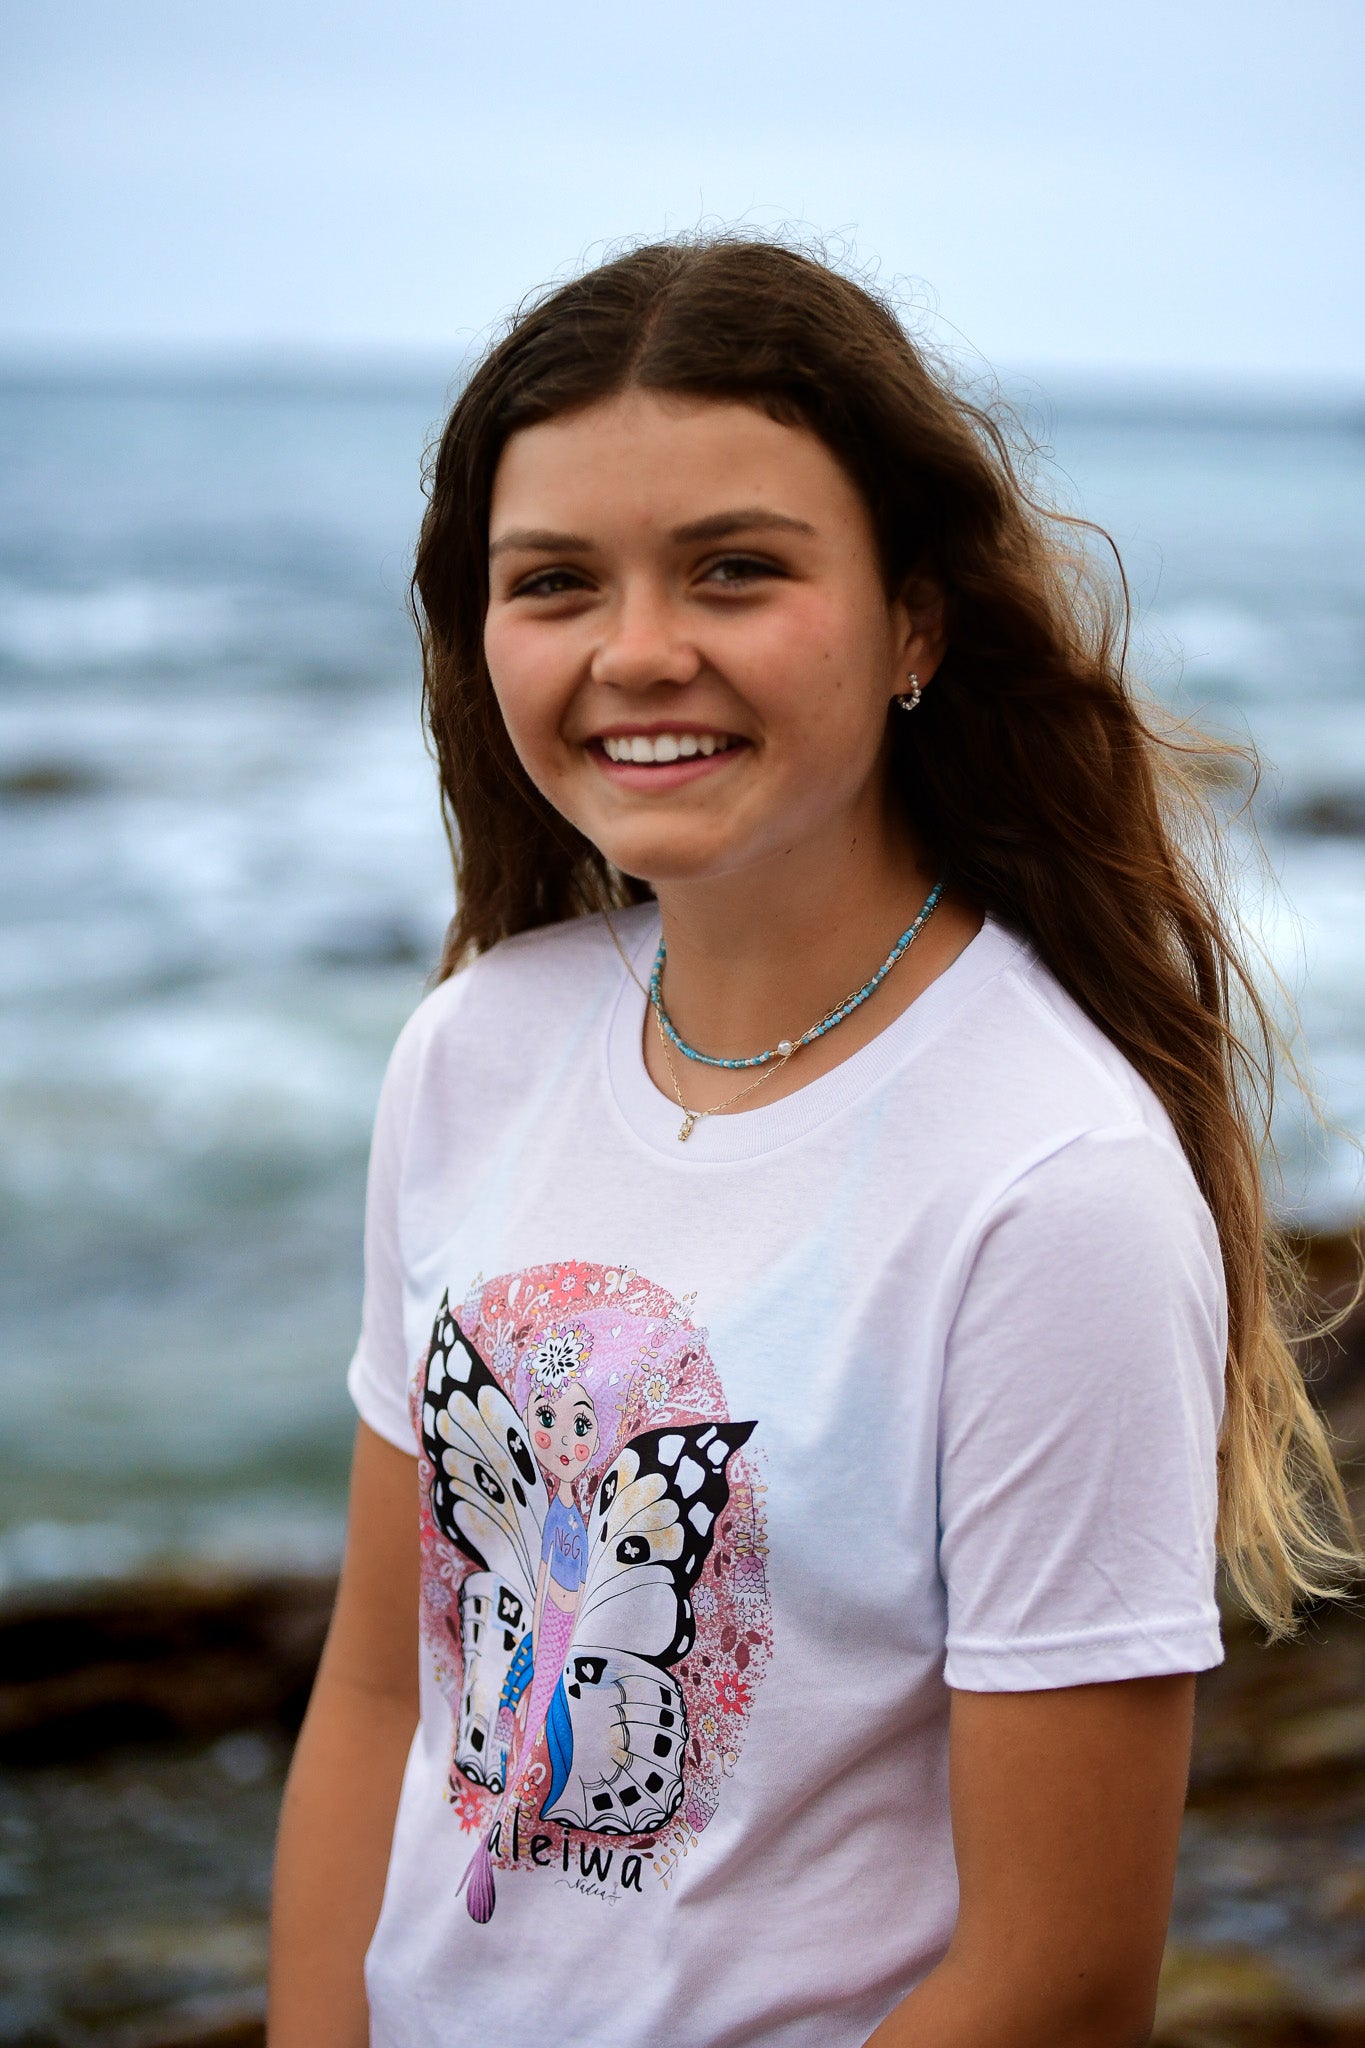 North Shore Girls Haleiwa inspired graphic tee featuring mermaid with butterfly wings and flowers. Art created by Nadia Watts